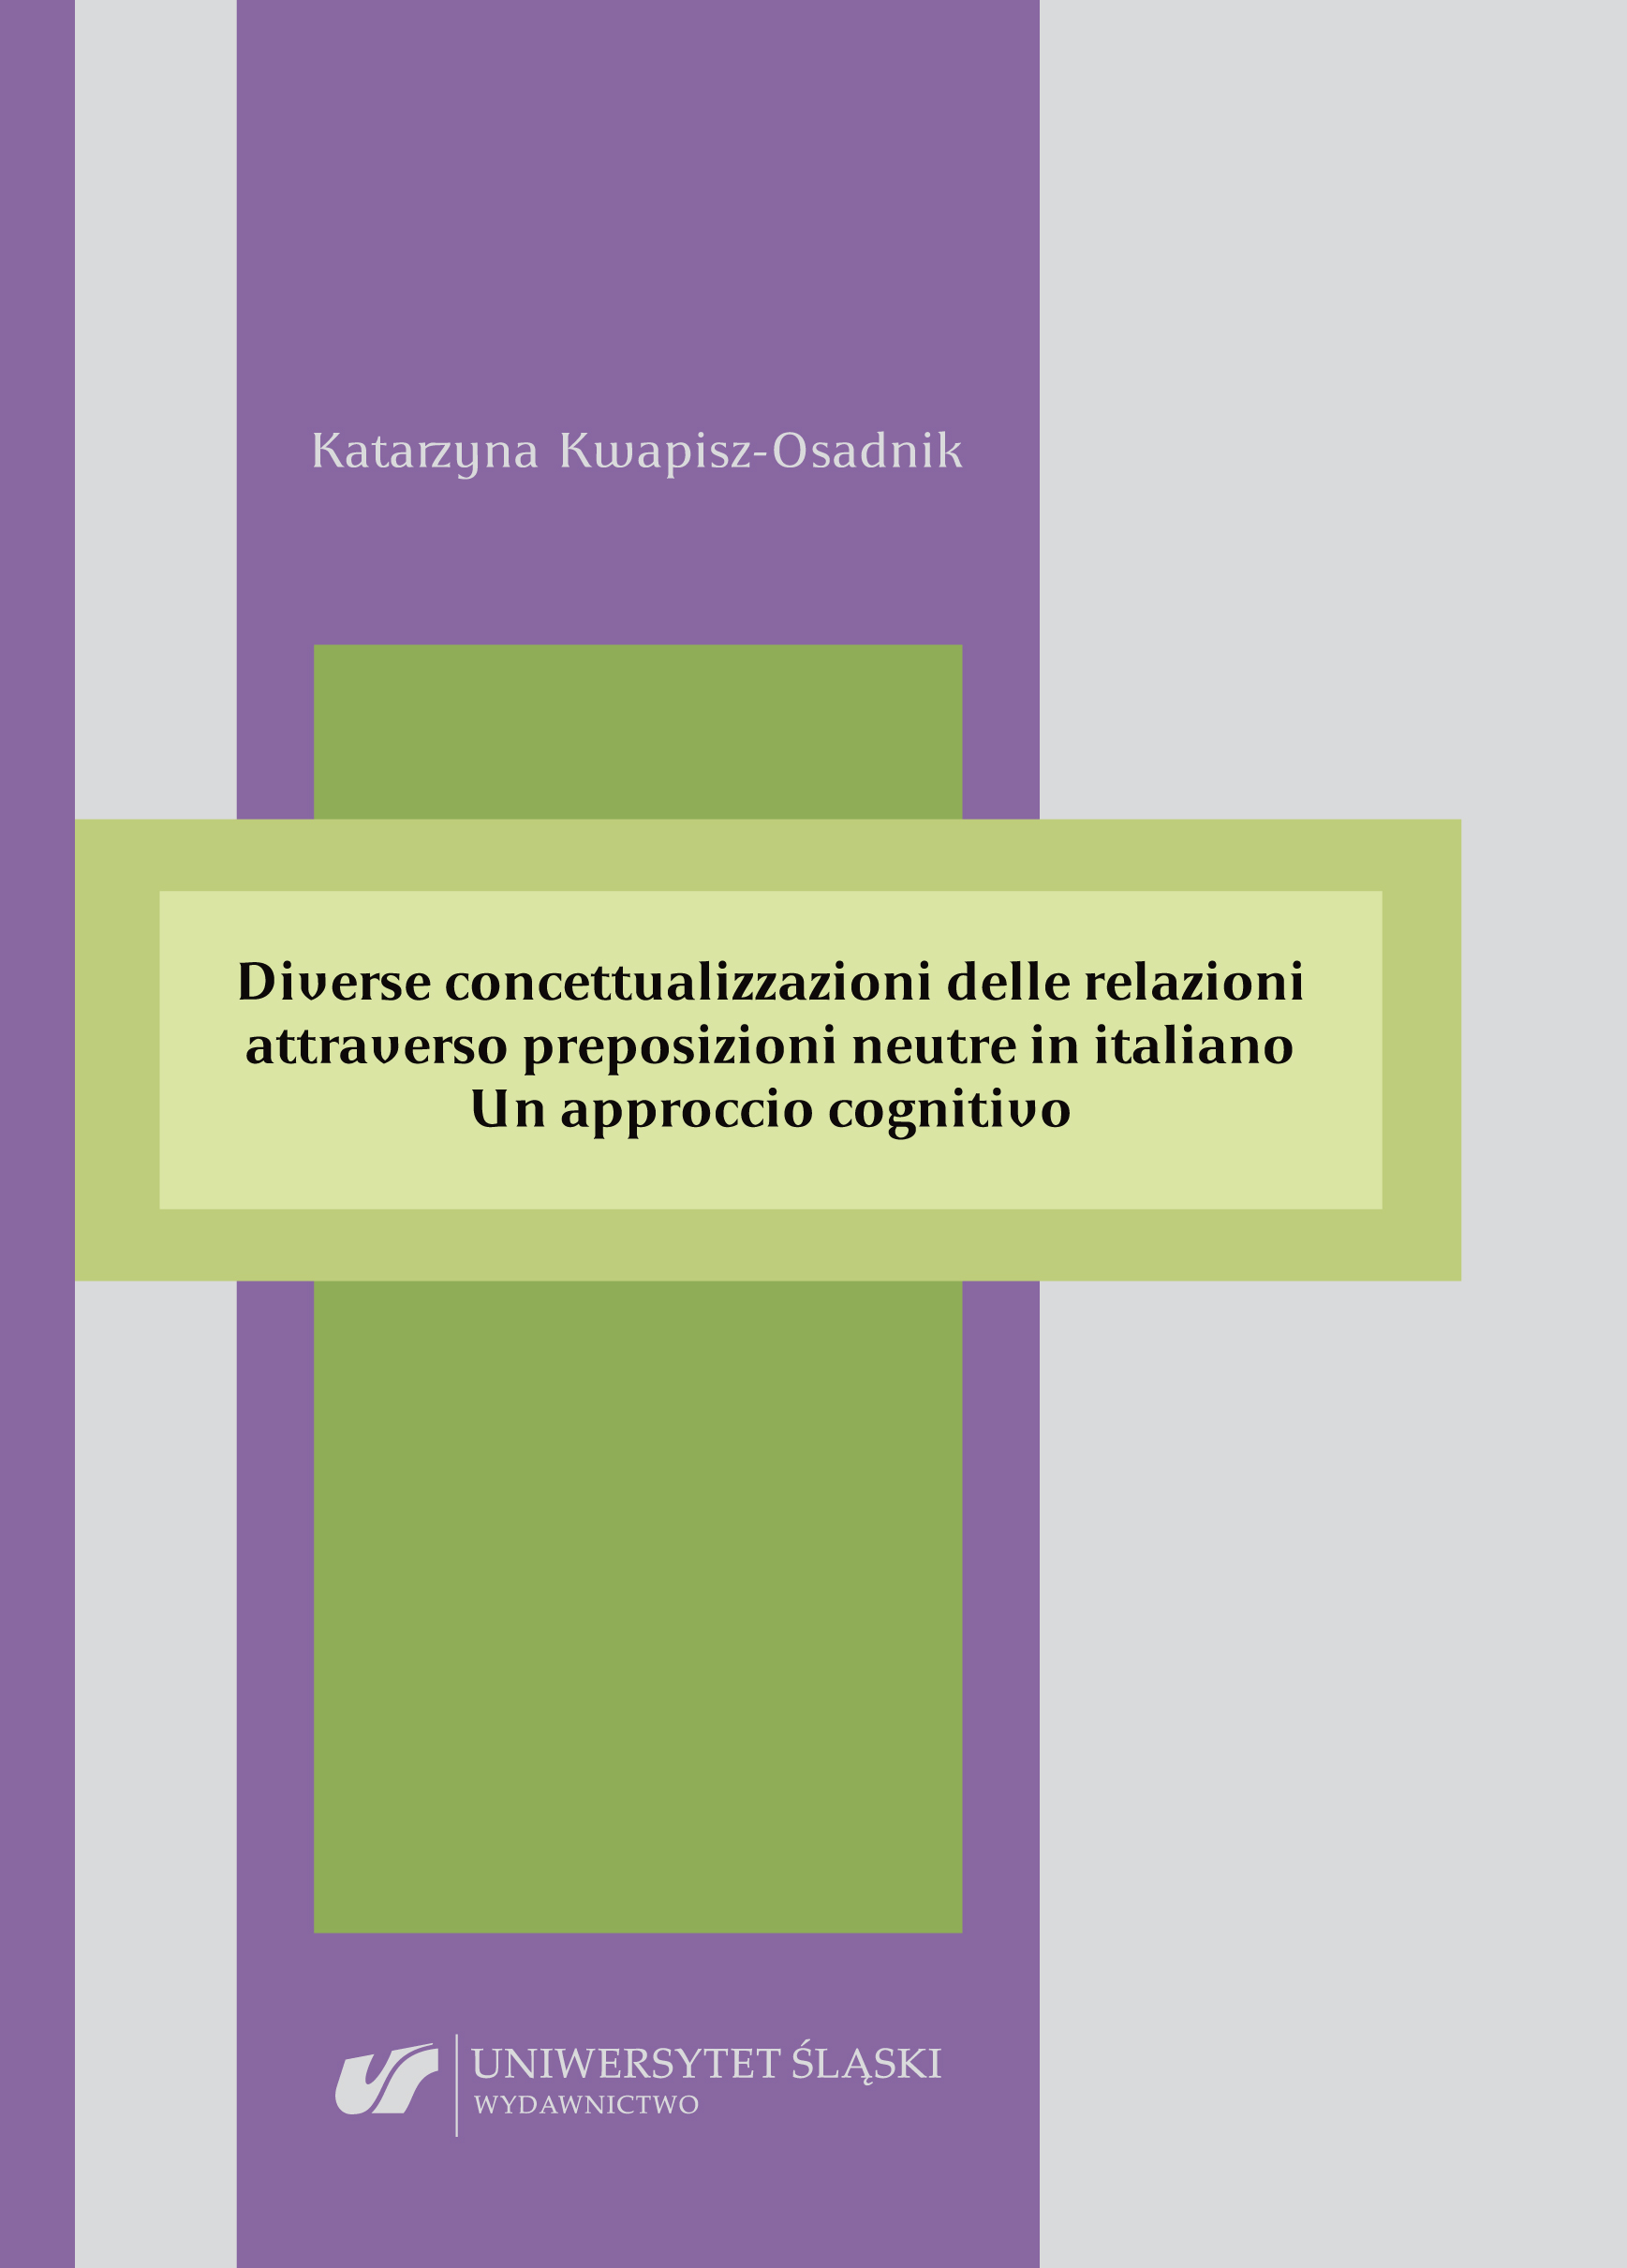 Different conceptualizations of relations through neutral prepositions in Italian. A cognitive approach